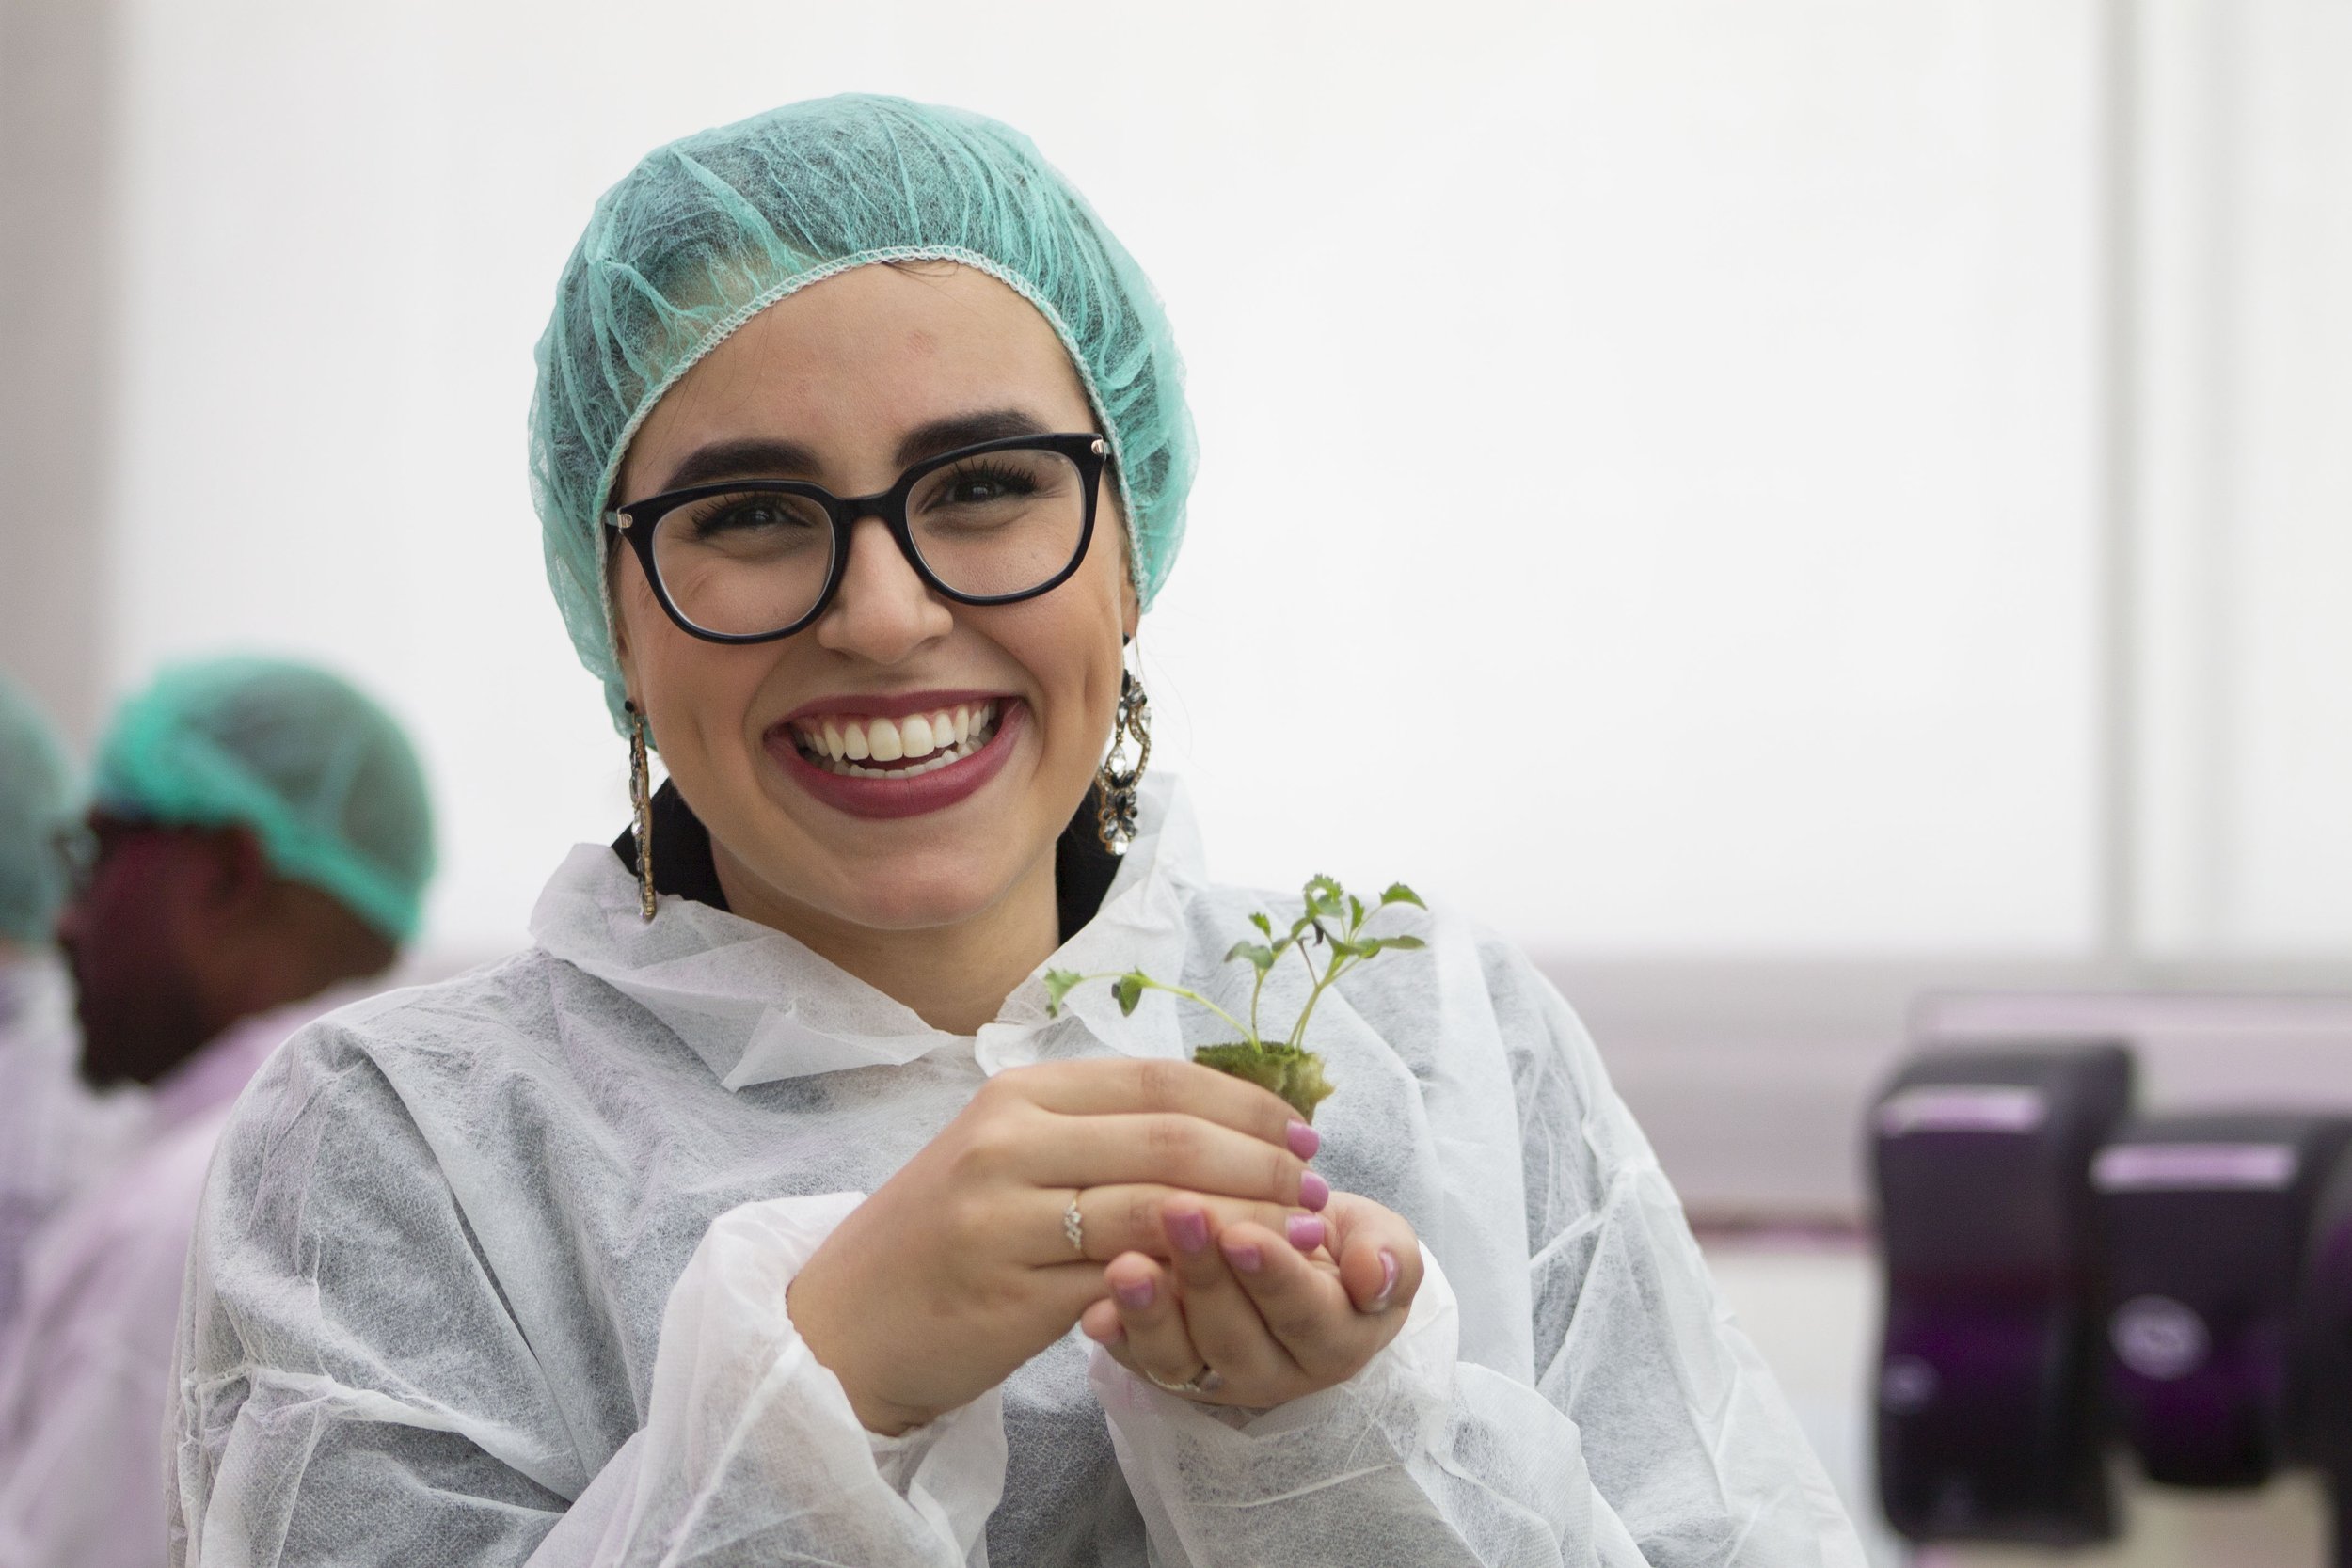 An Eden Green employee smiles holding a sprouting plant in her hands